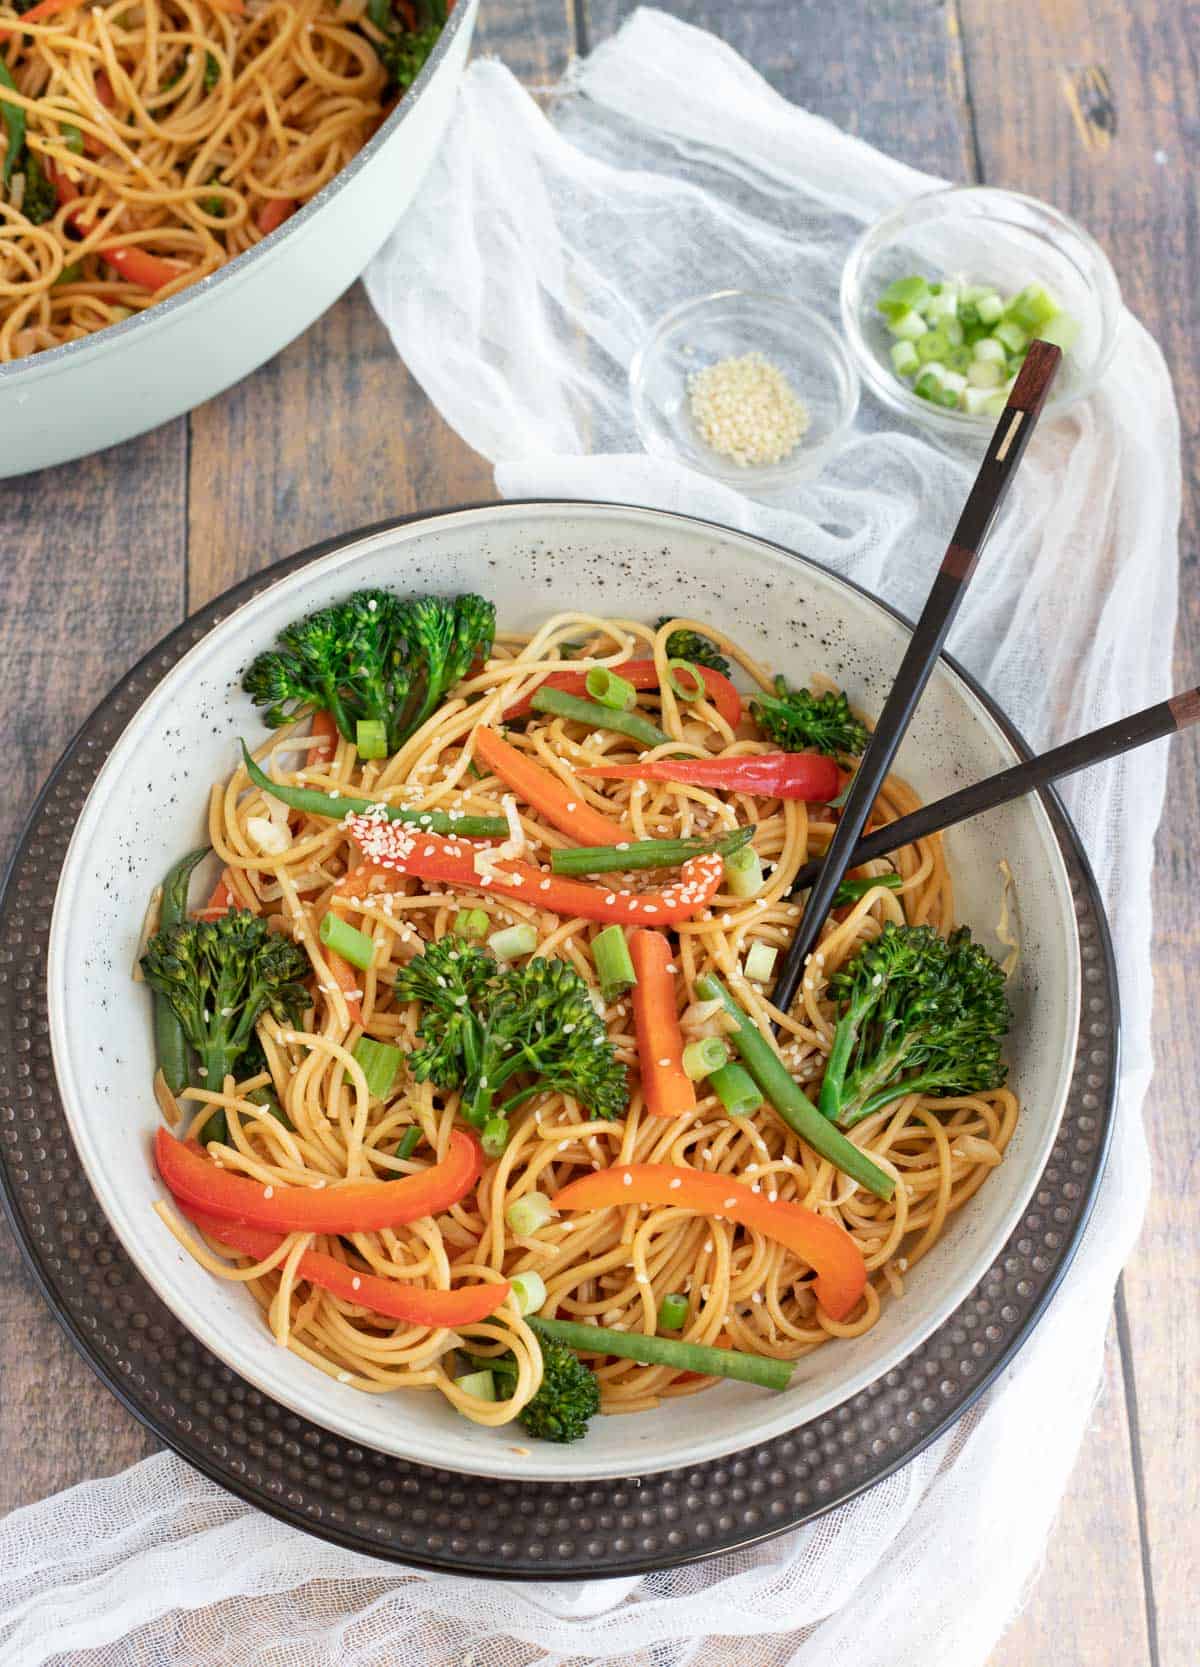 Chow mein noodles with vegetables in bowl with chopsticks.